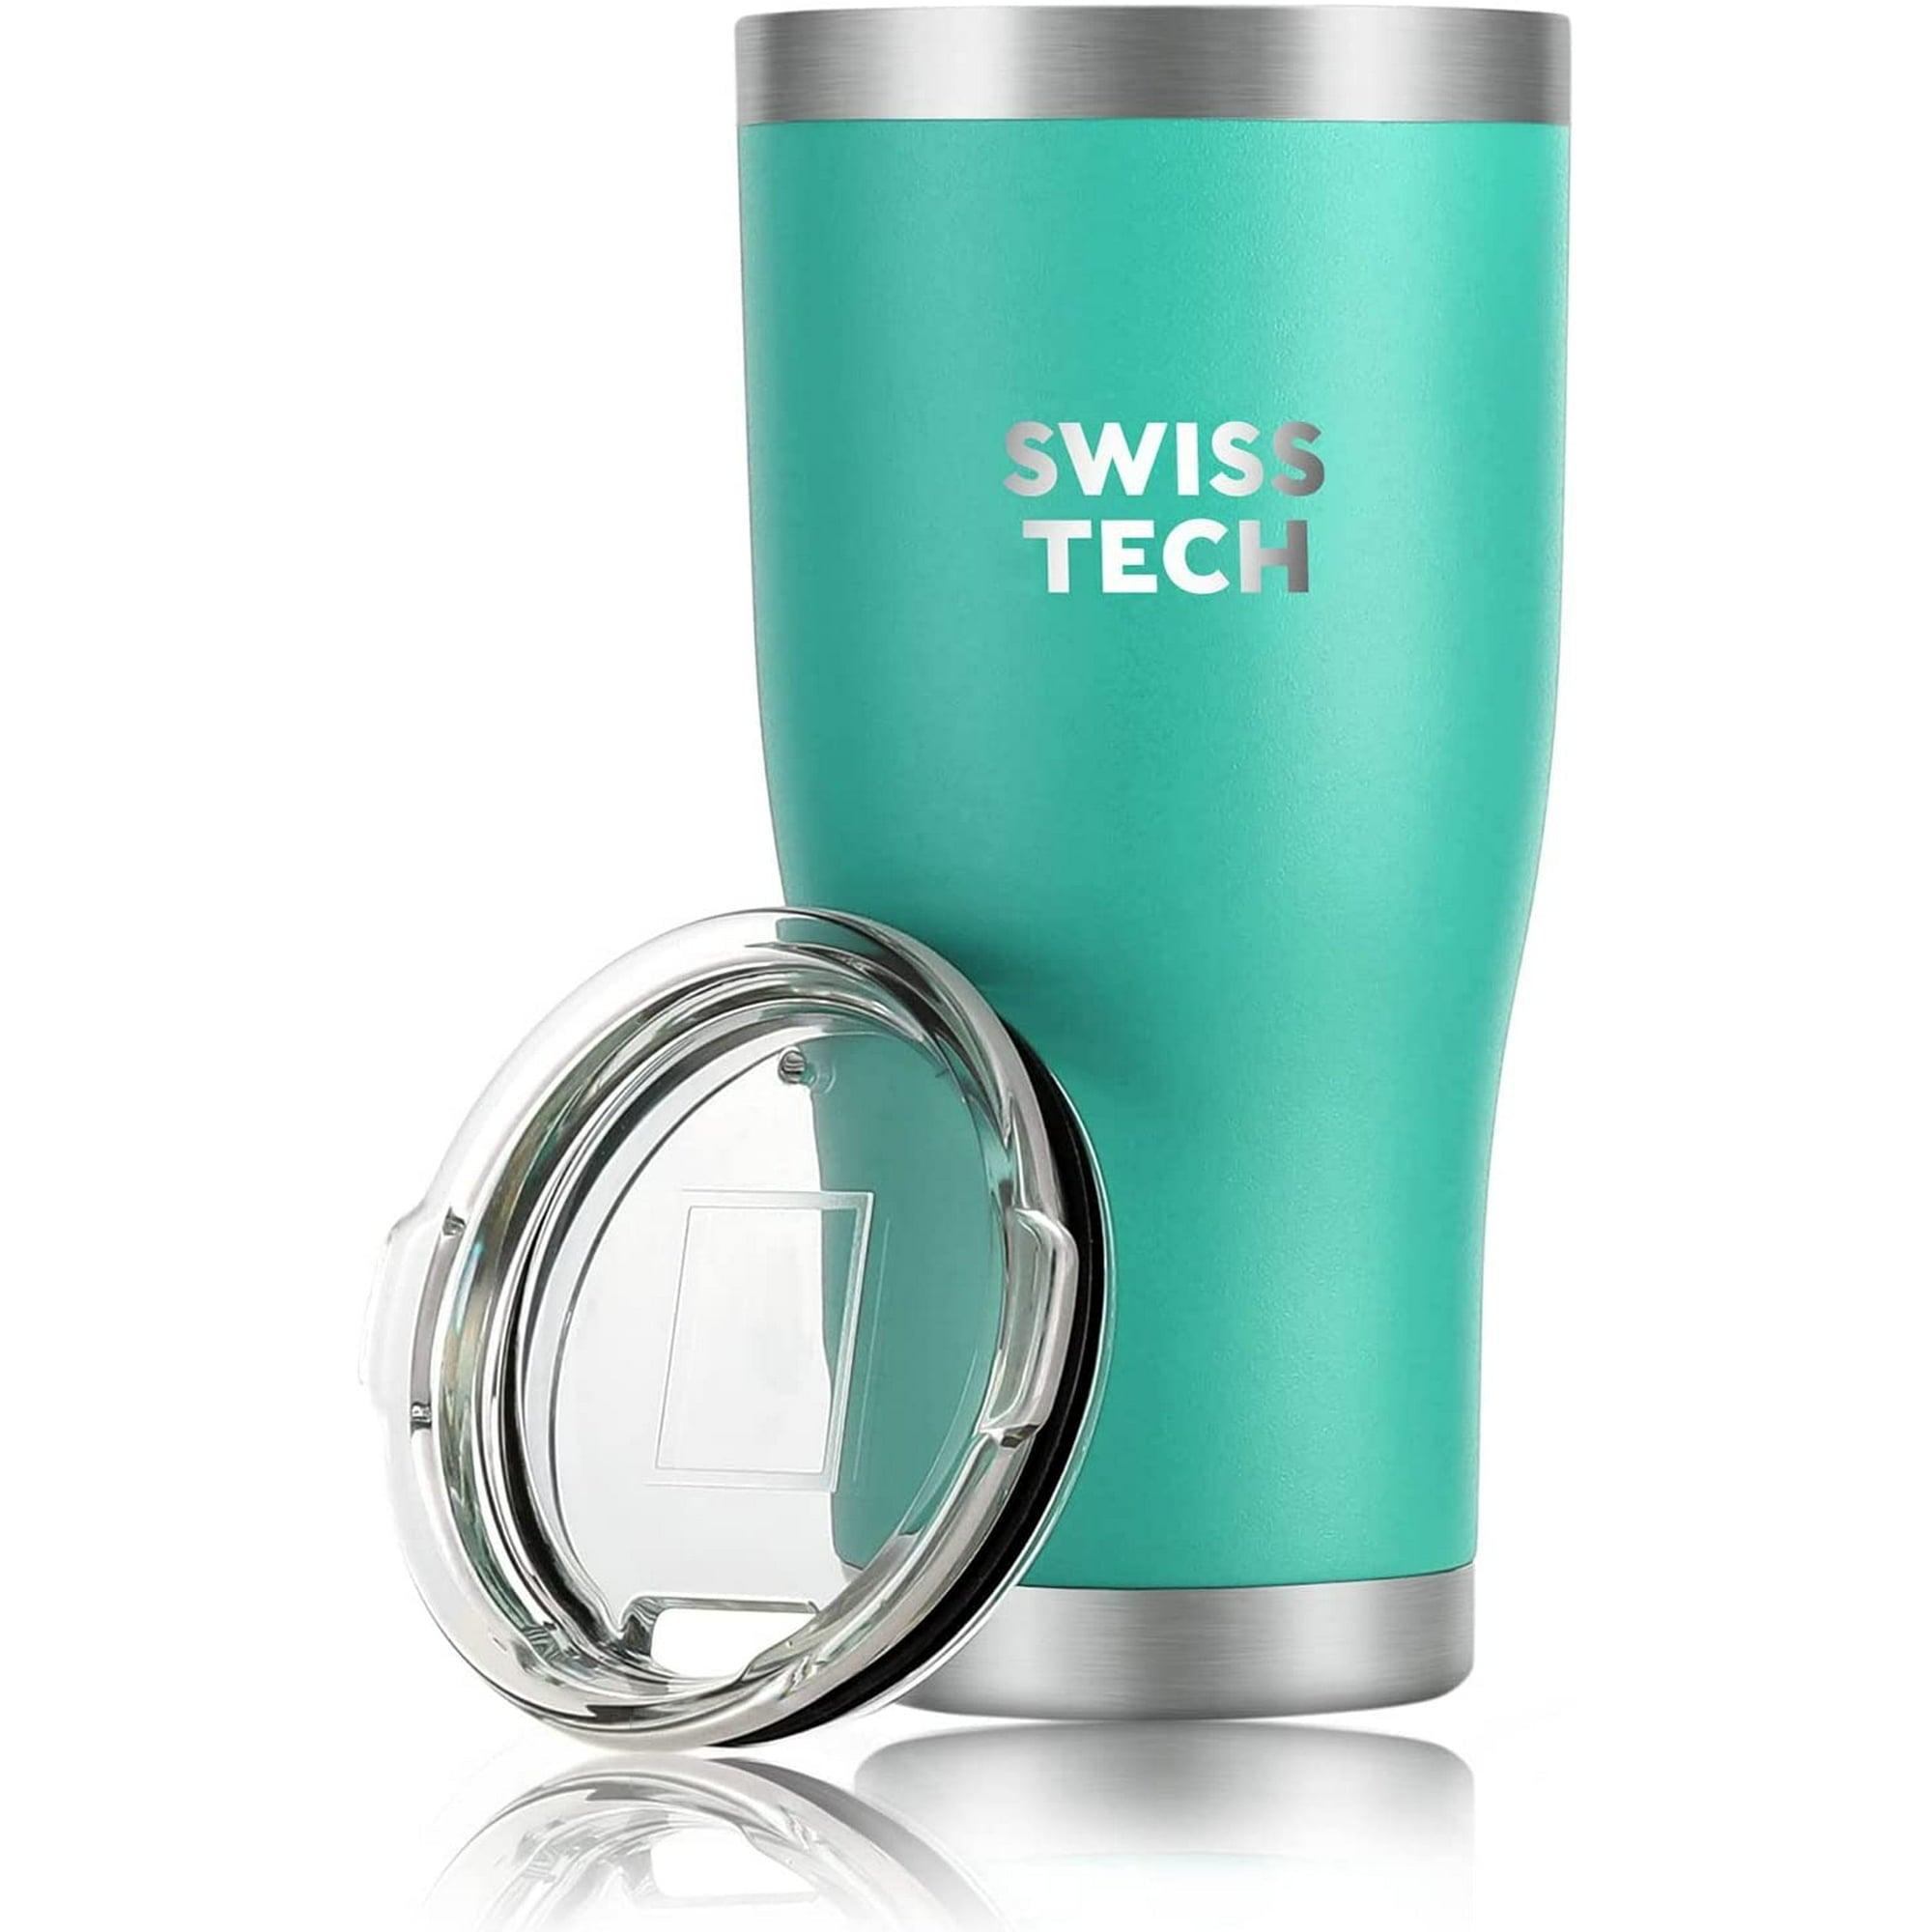 SWISS+TECH Stainless Double Wall Vacuum Insulated Tumbler with Lid, Color/Size options:  30oz - White, Turquoise, Black and Red, 20oz - White, Turquoise, Black and Red, 14oz Mug-White, Turquoise and Black, 10oz - White, Turquoise, Black and Red